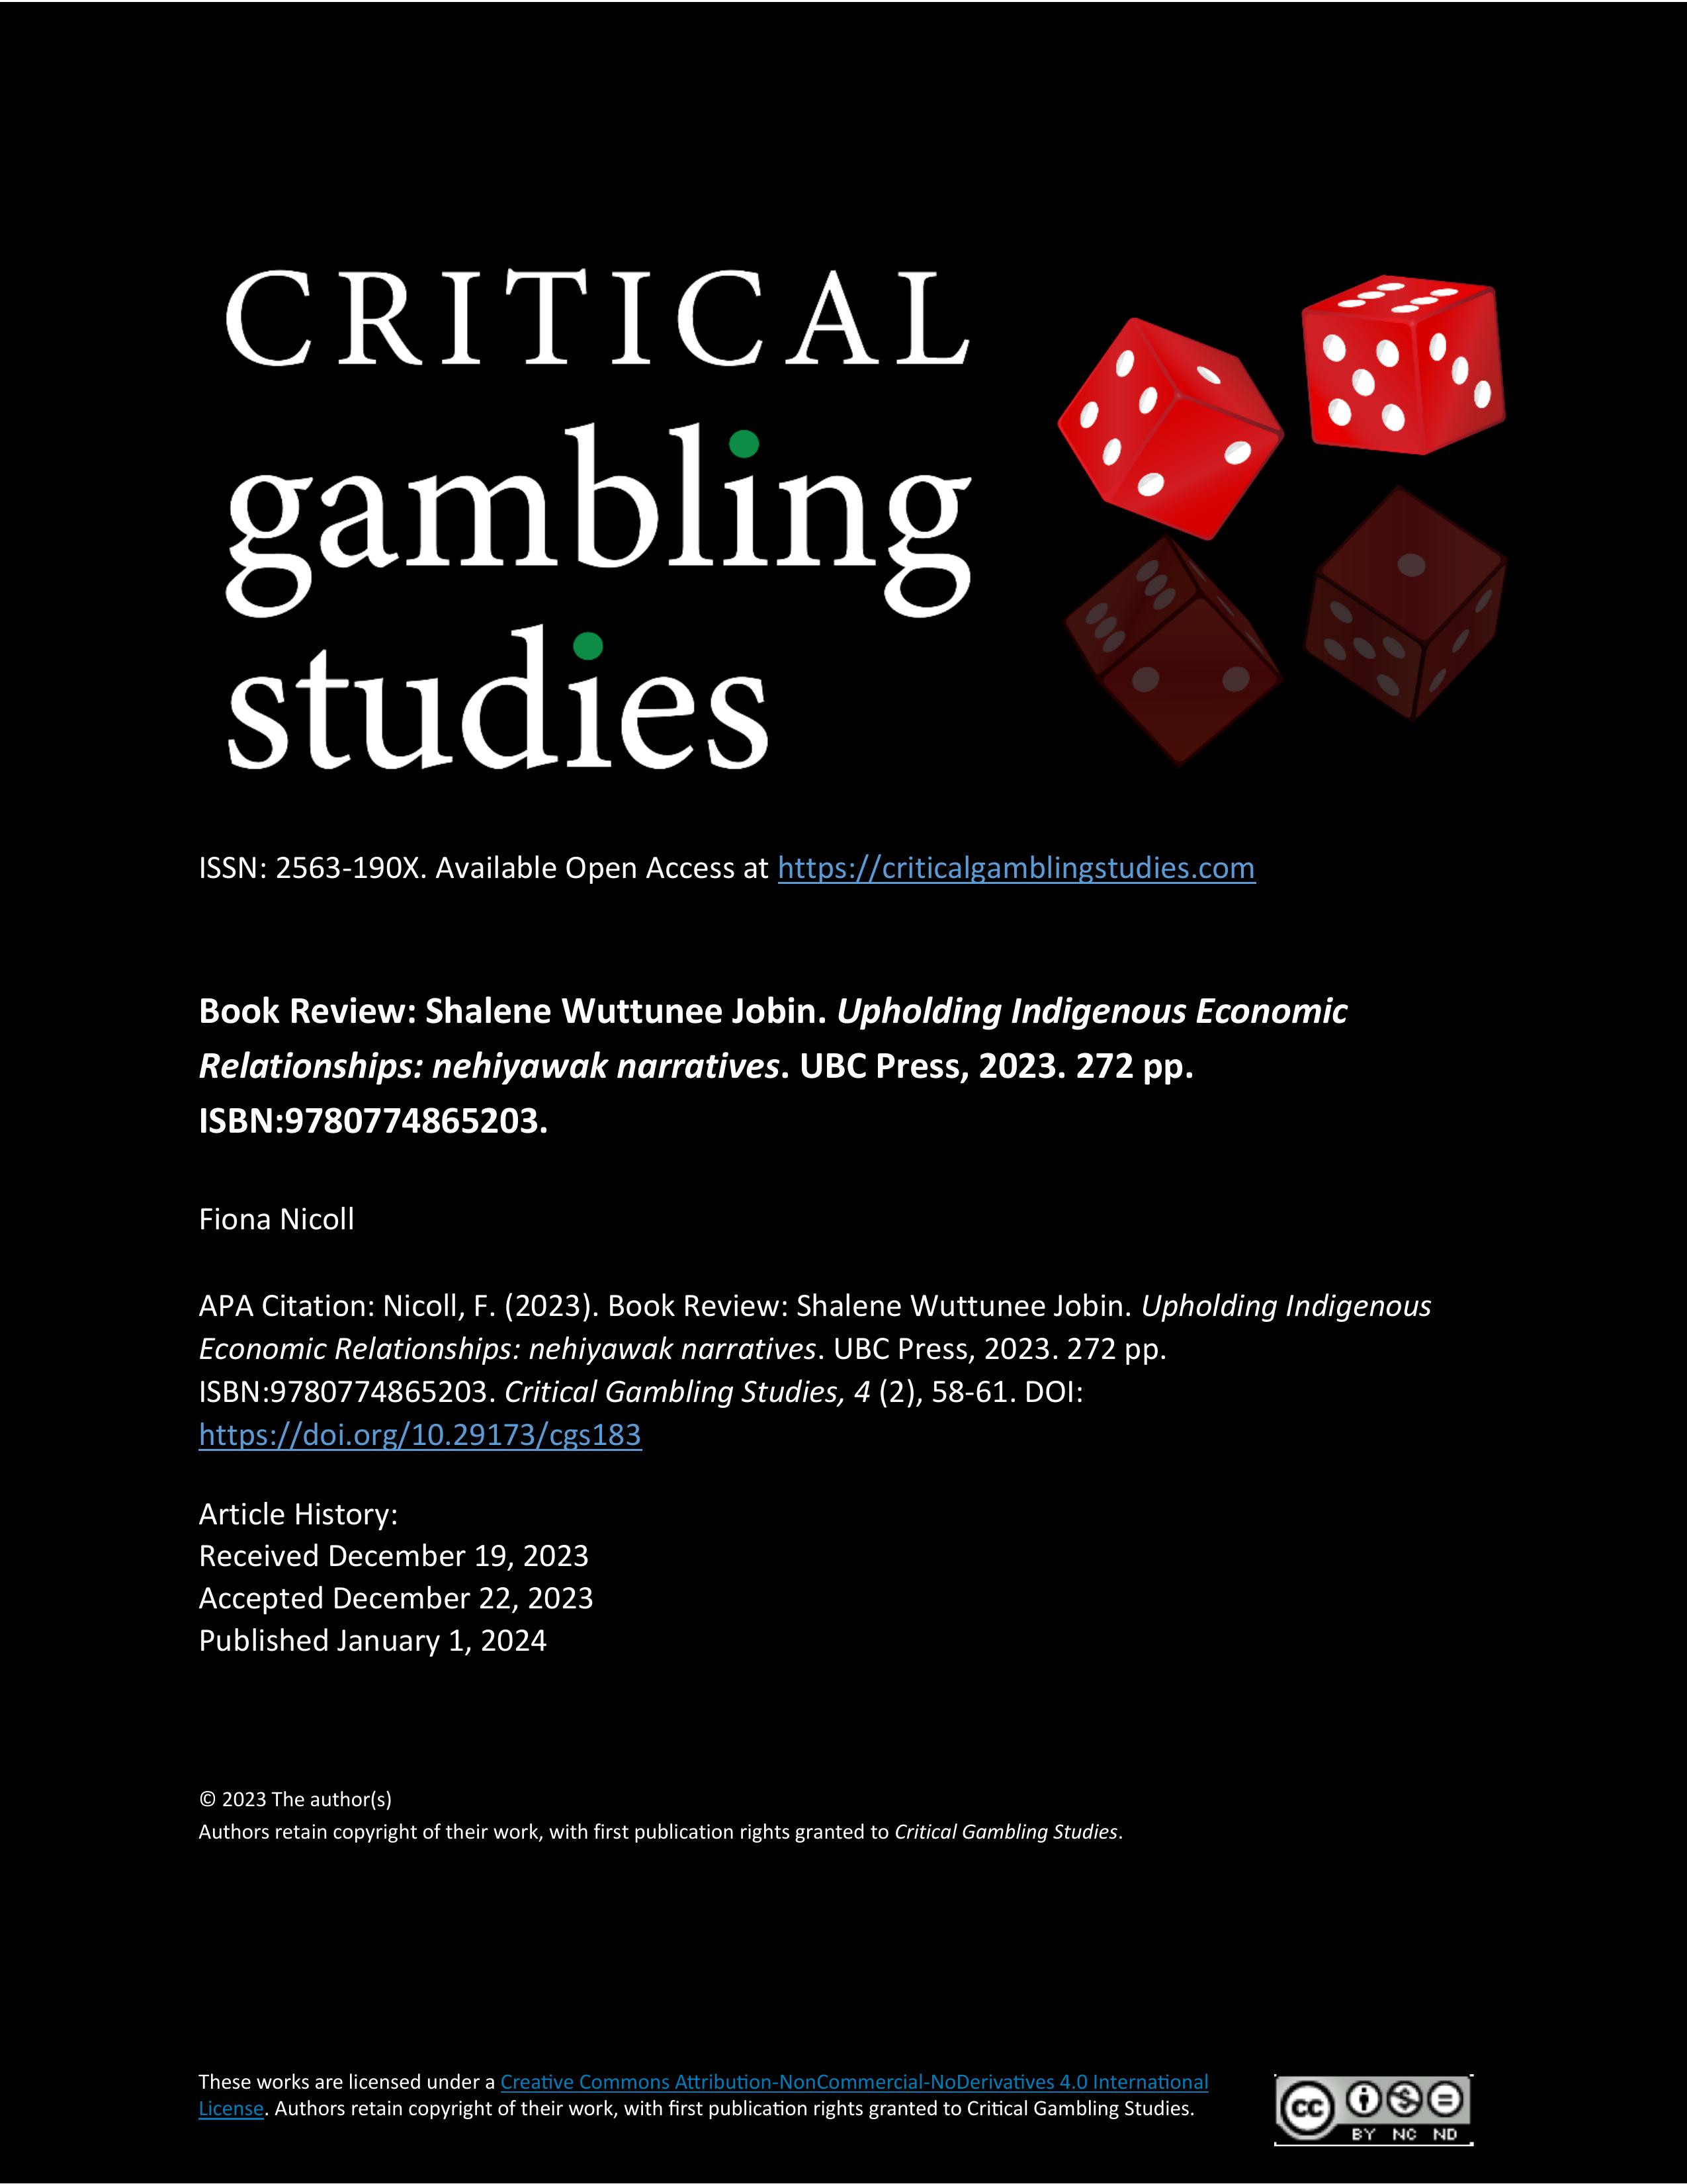 This is the cover page for this article. It shows the title of the journal Critical Gambling Studies, two red dice with white dots for numbers and the title and information of this article.